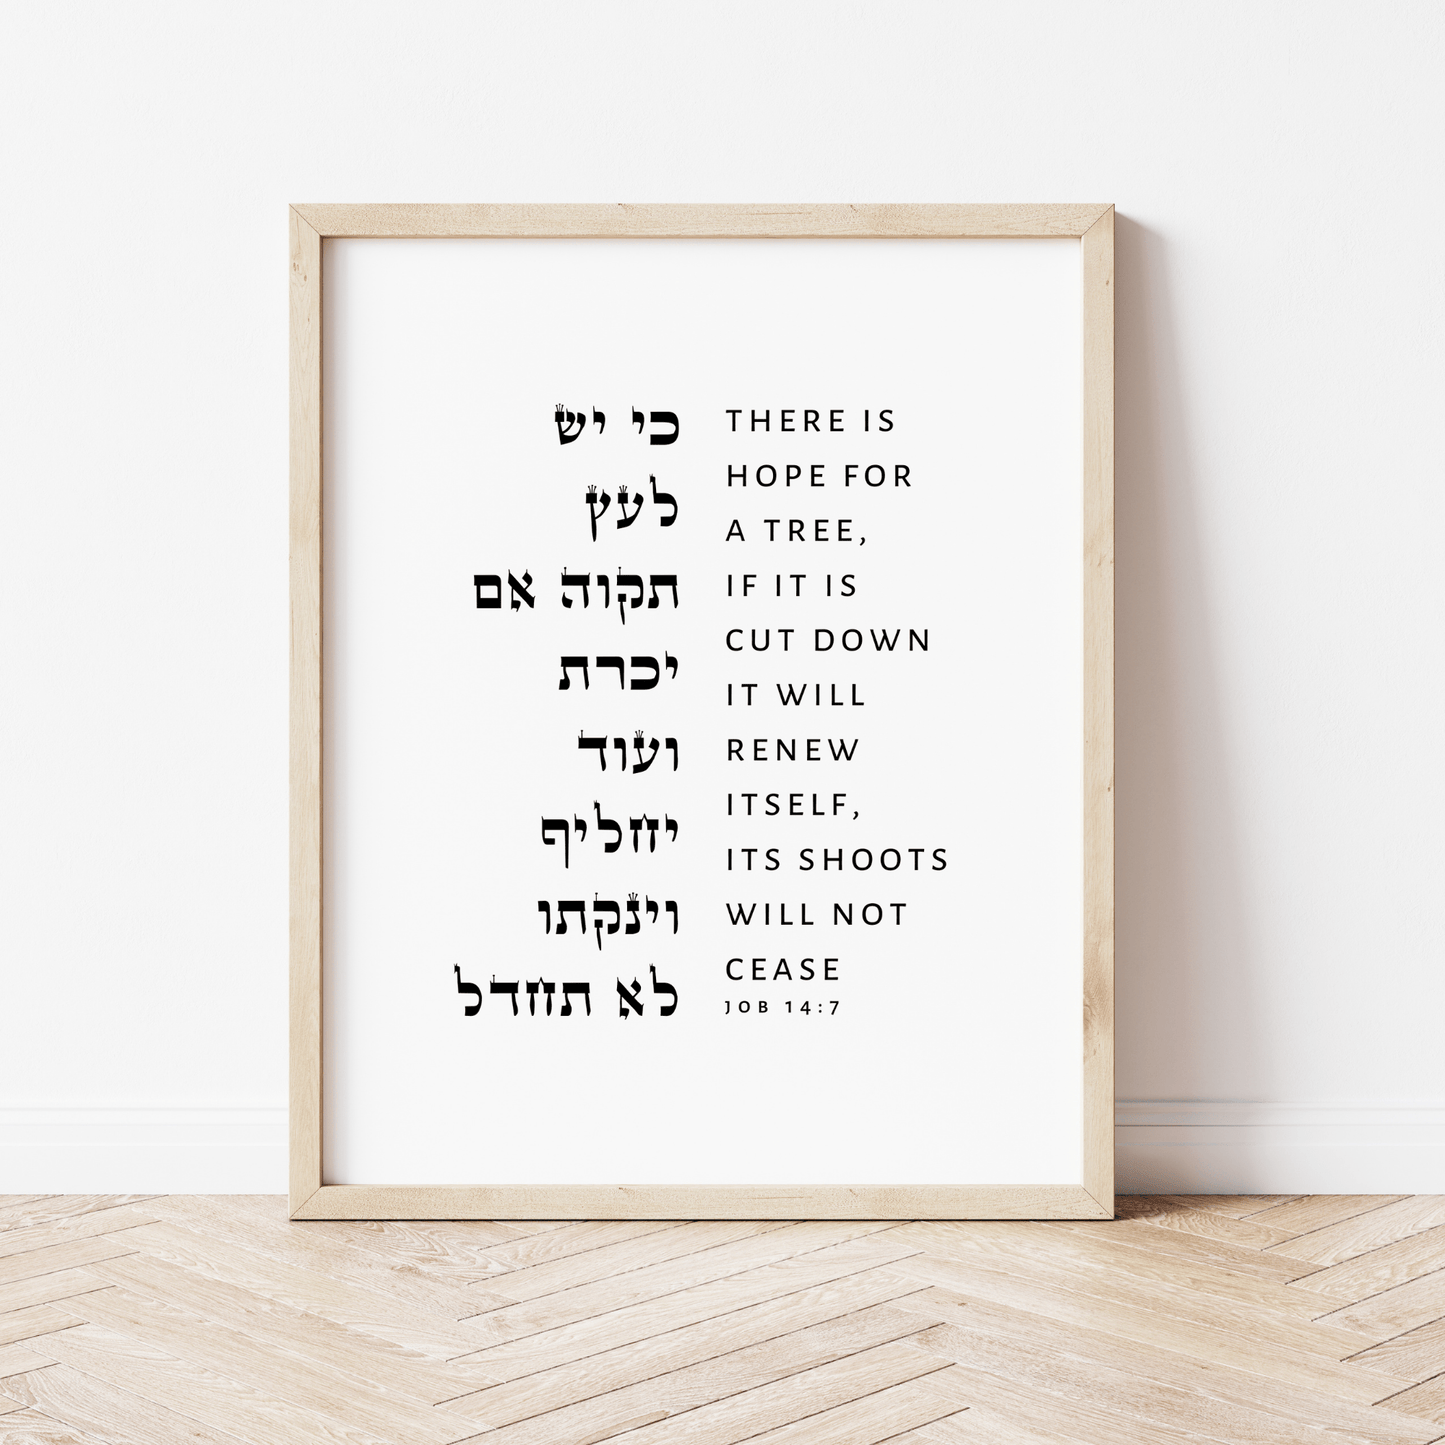 The Verse Job 14:7 Job 14:7 |Bible Verse Wall Art Print | There is hope for a tree